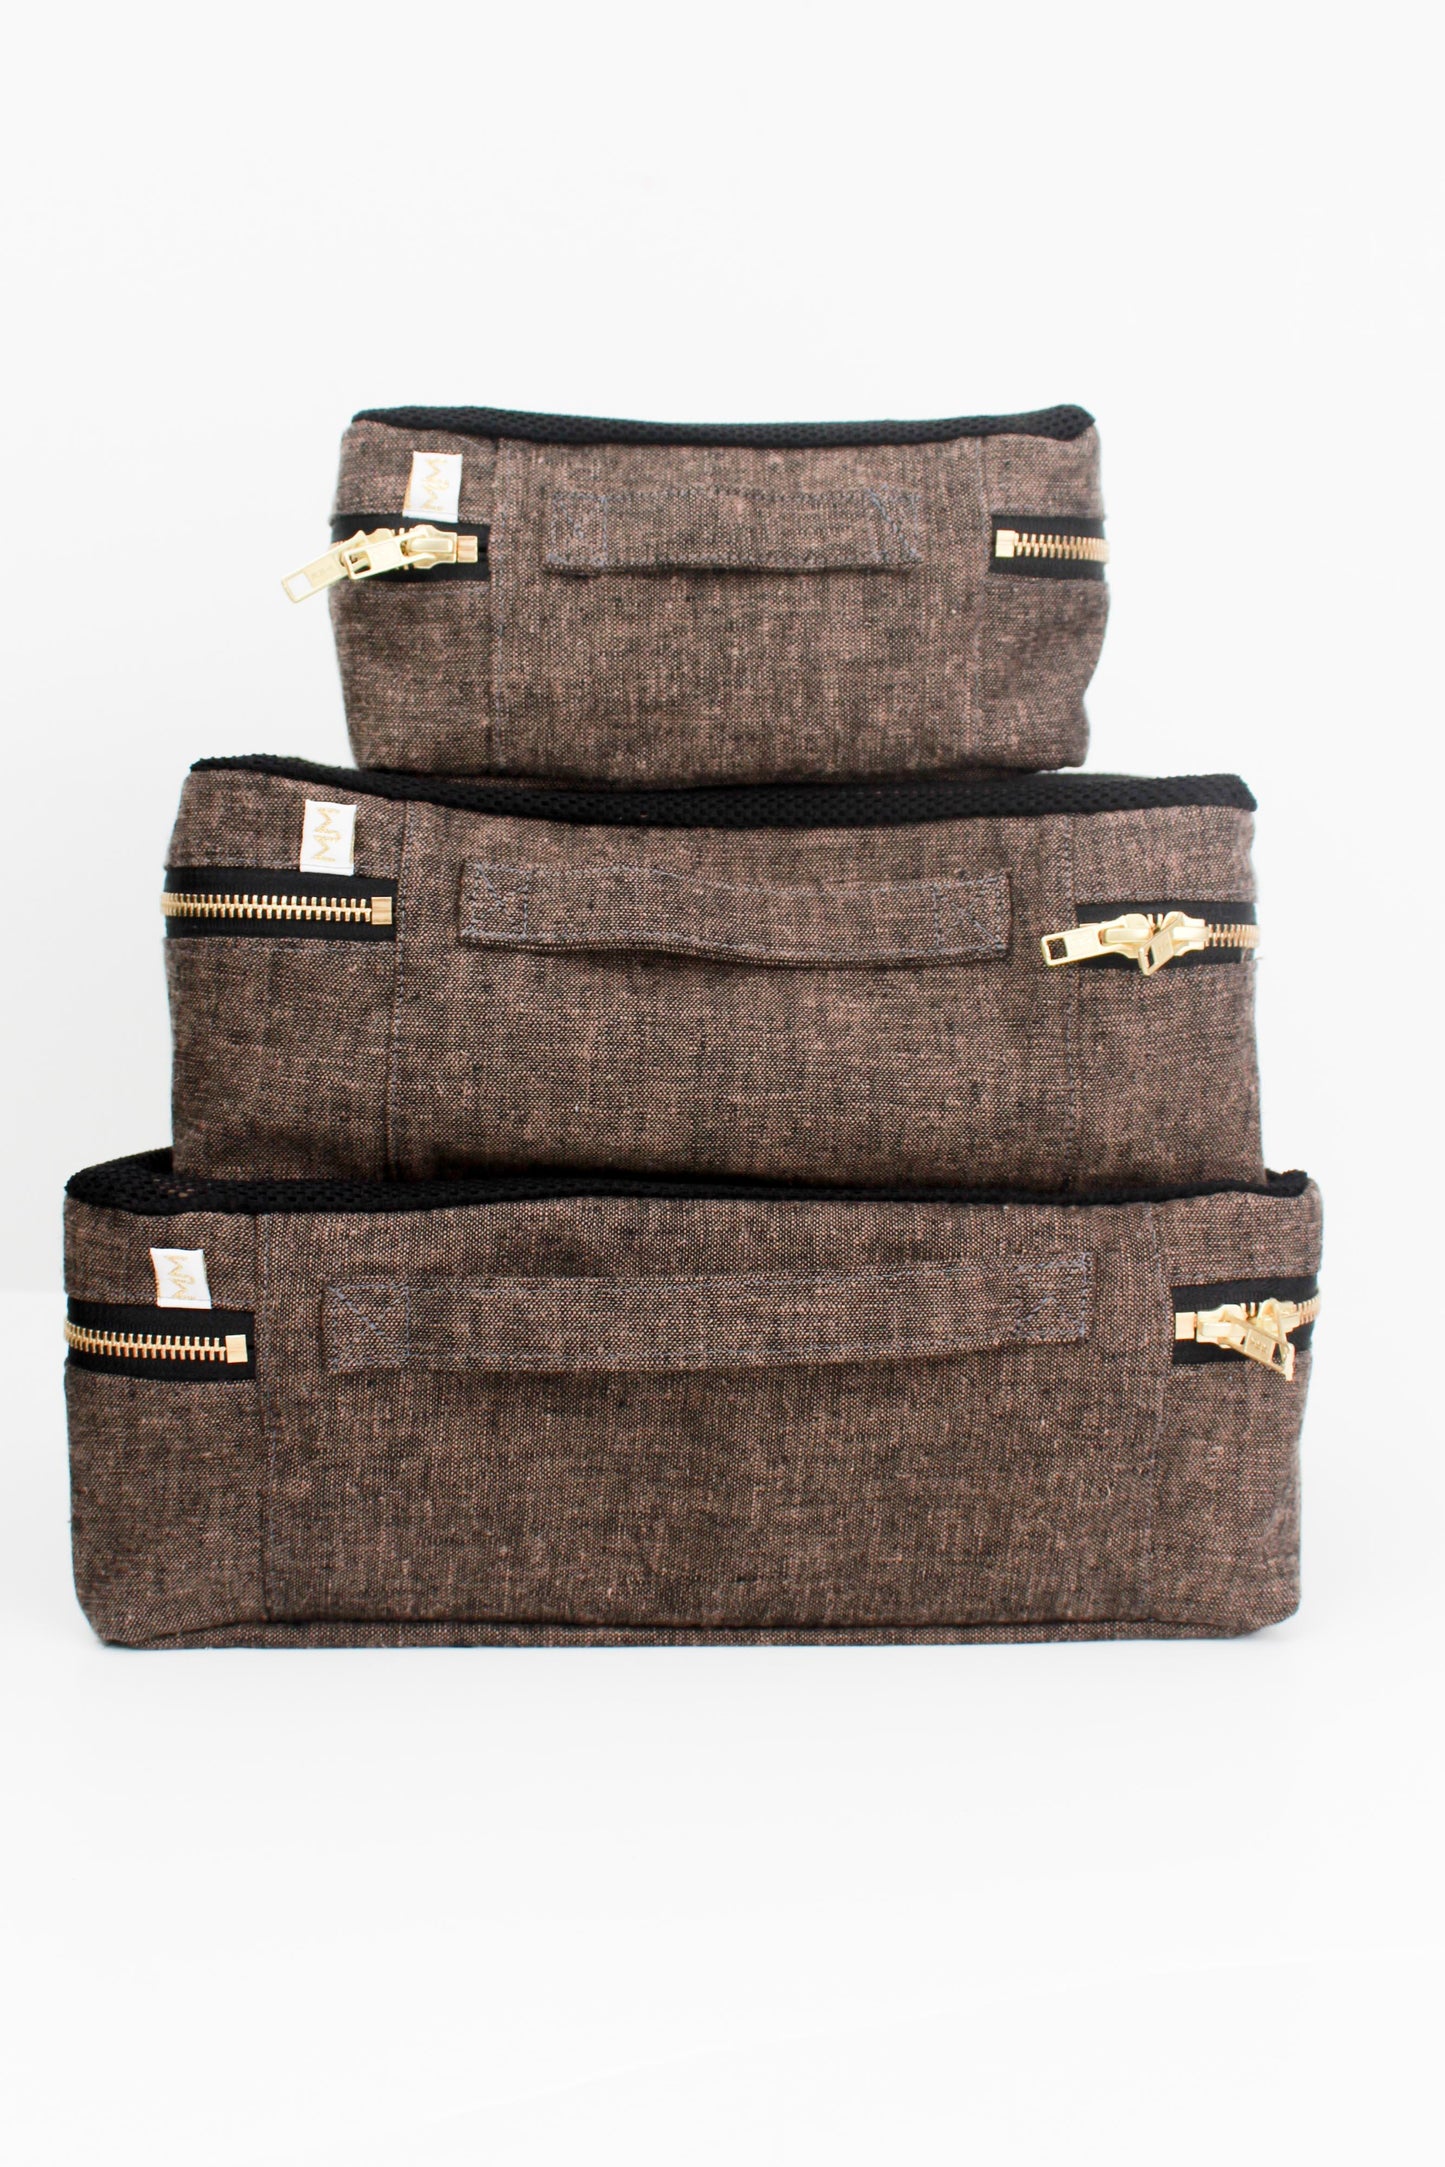 Espresso Linen 3pc Luggage Cube Set READY TO SHIP - Modern Makerie